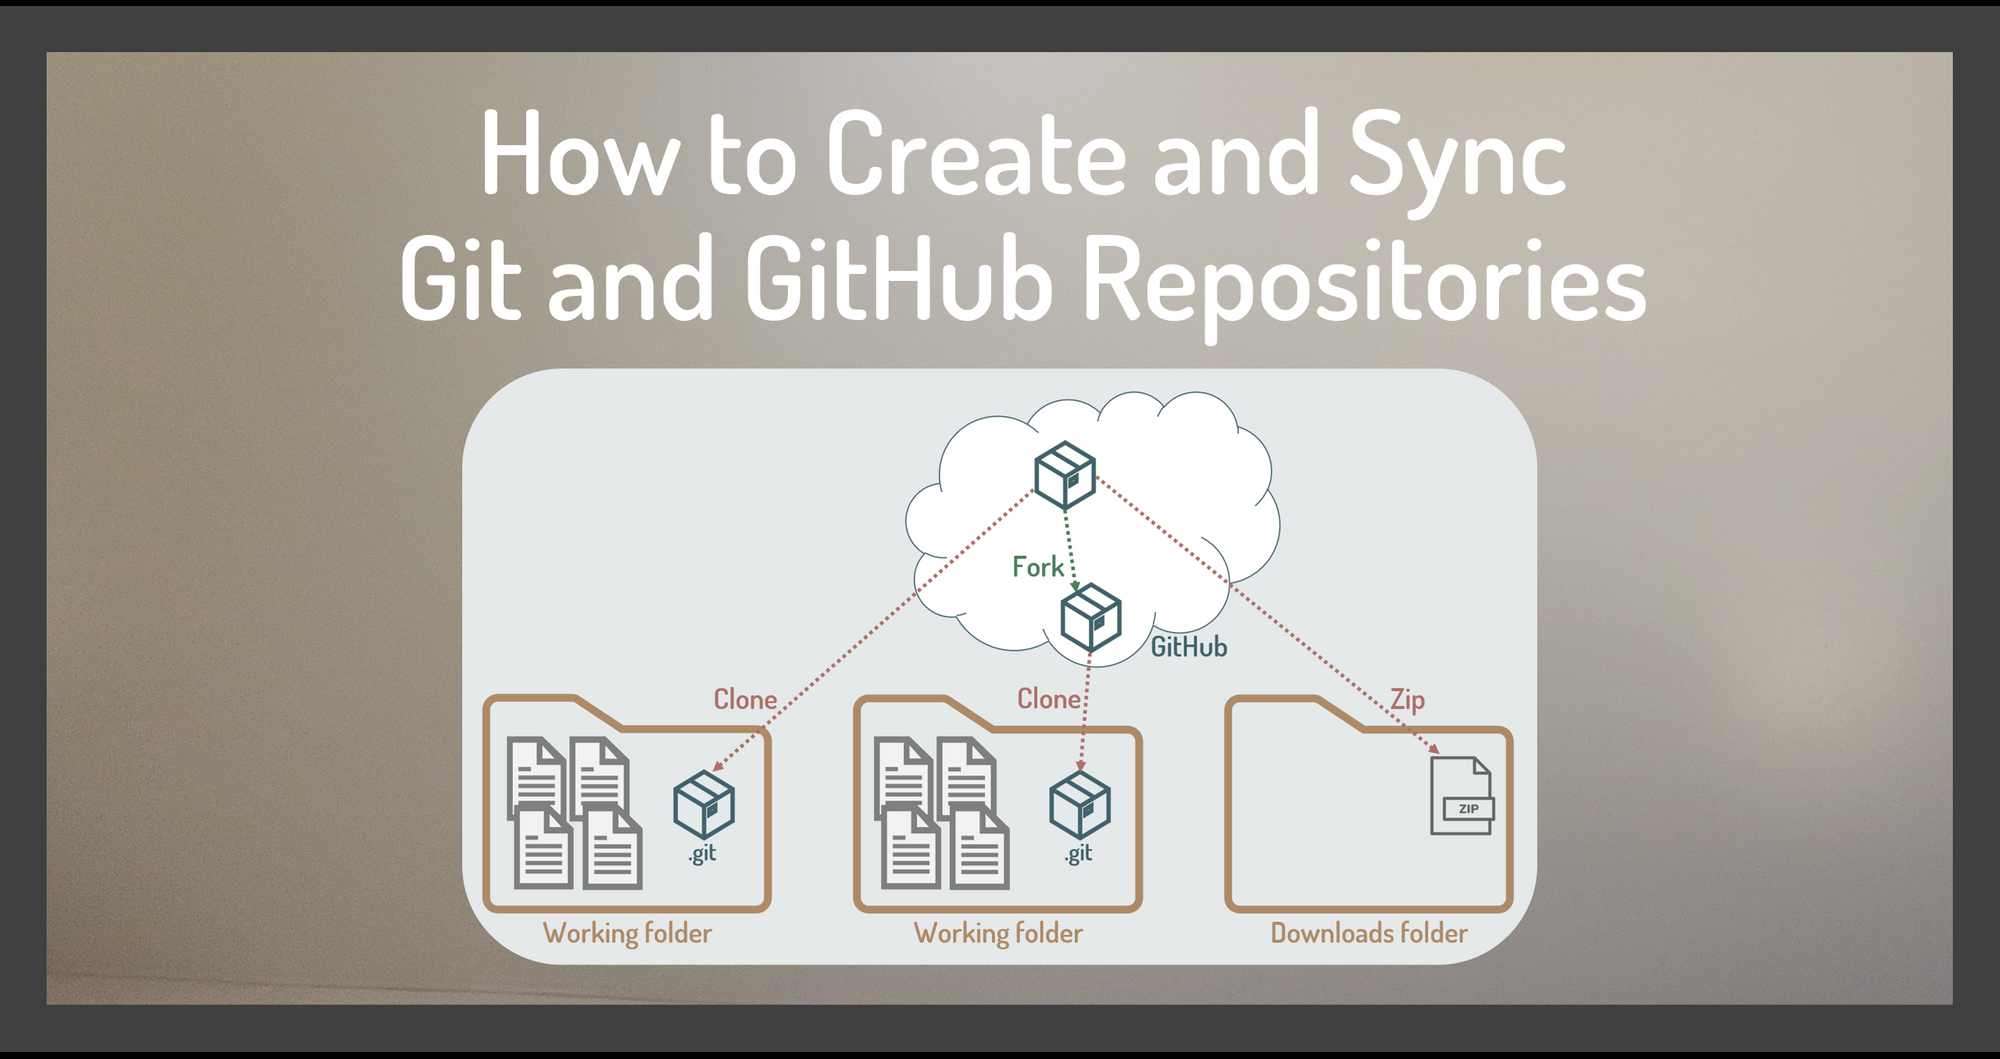 How to Create and Sync Git and GitHub Repositories